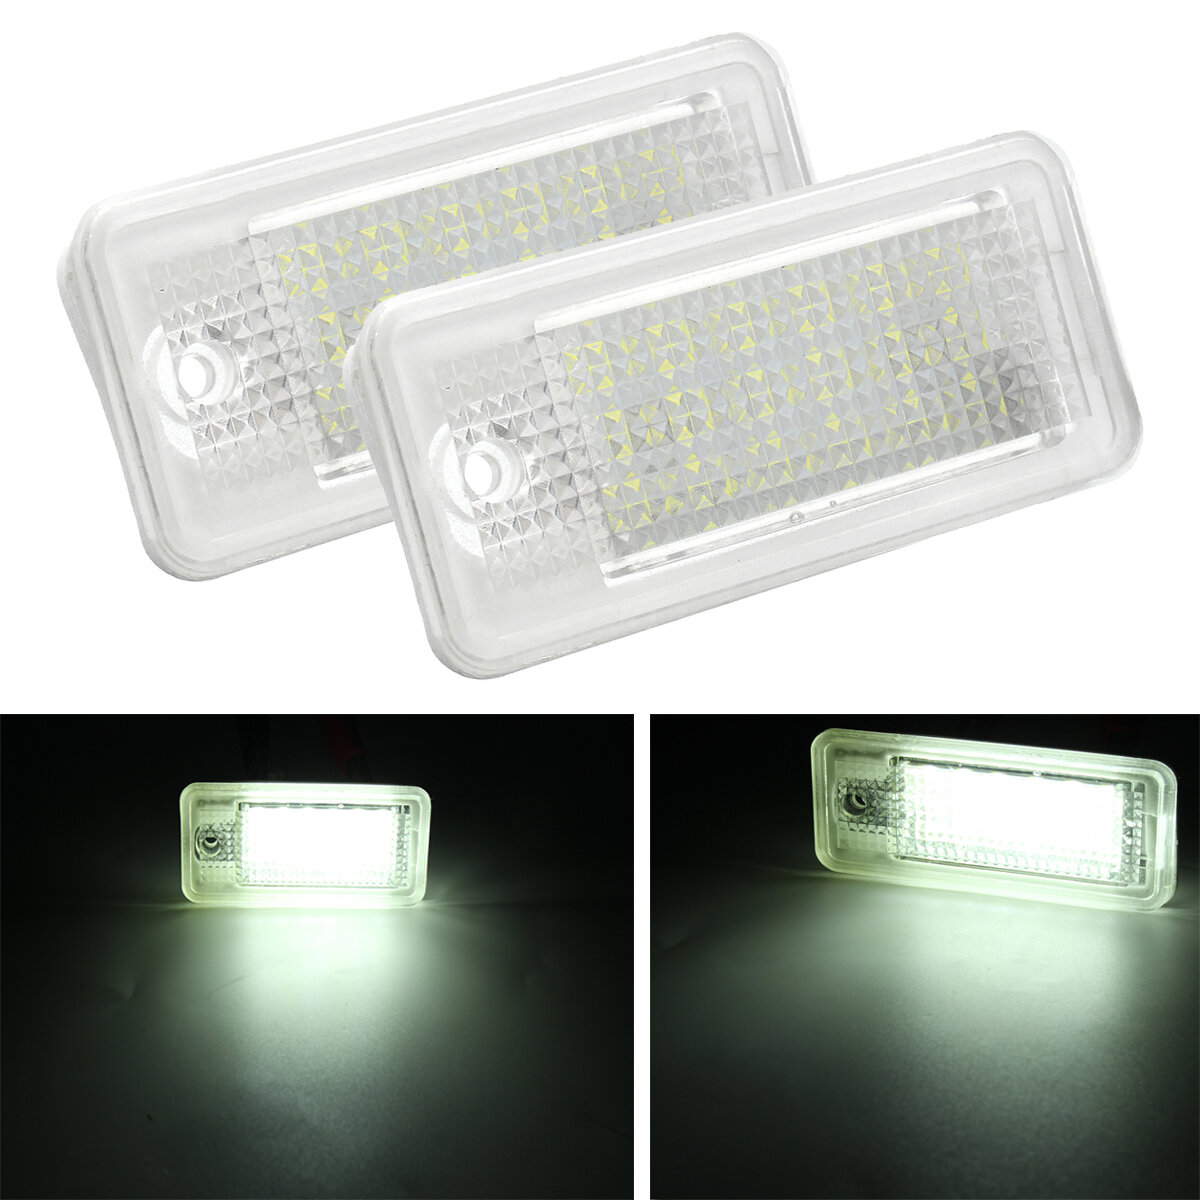 18 LED-licentie nummerplaat lamp voor Audi A3 A4 A6 A8 B6 B7 S3 Q7 RS4 RS6